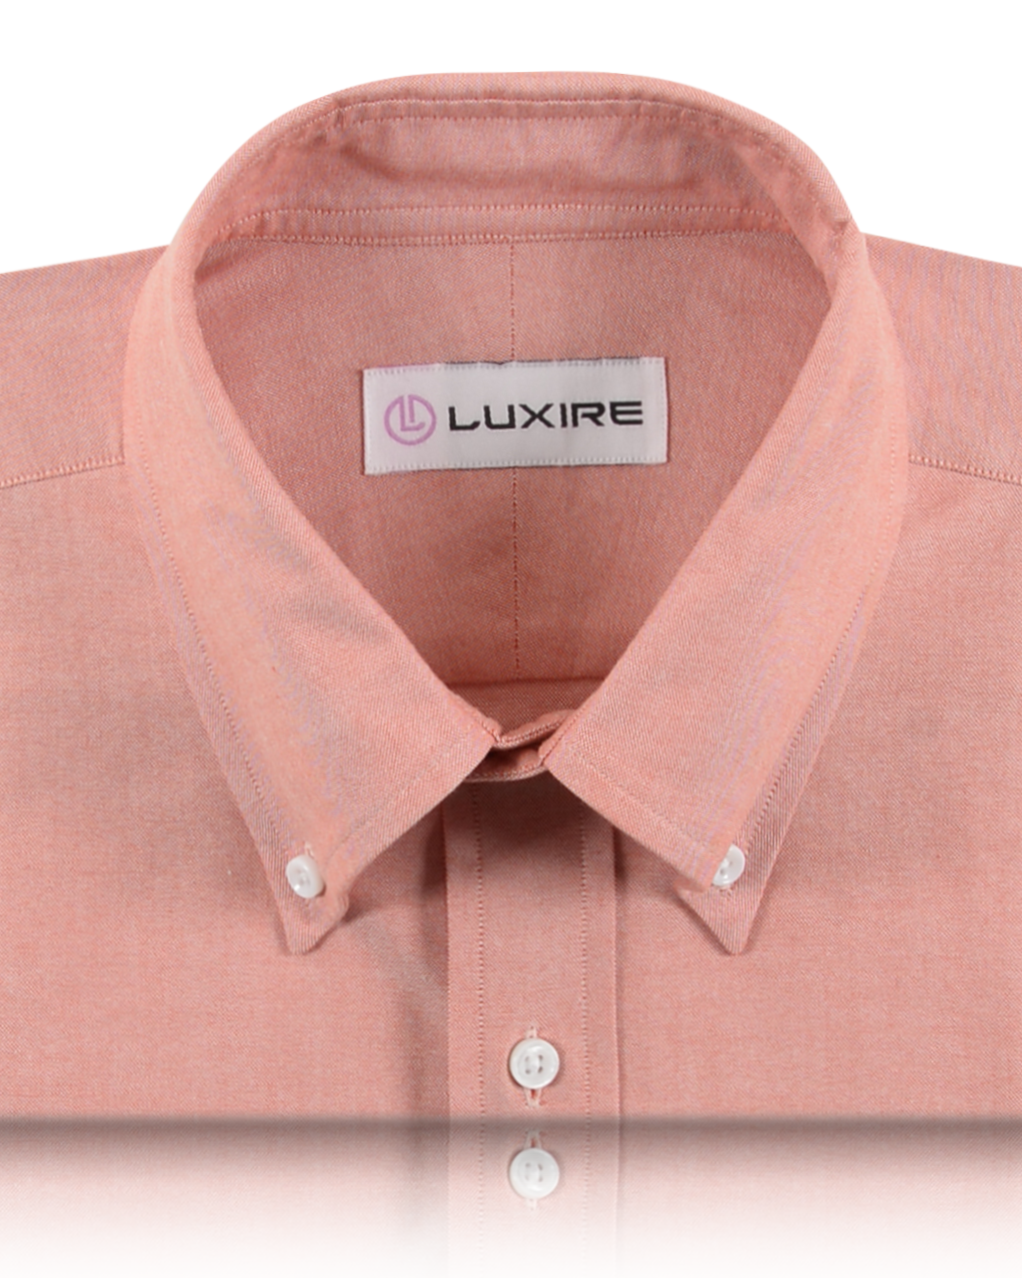 Collar of the custom oxford shirt for men by Luxire in reddish orange